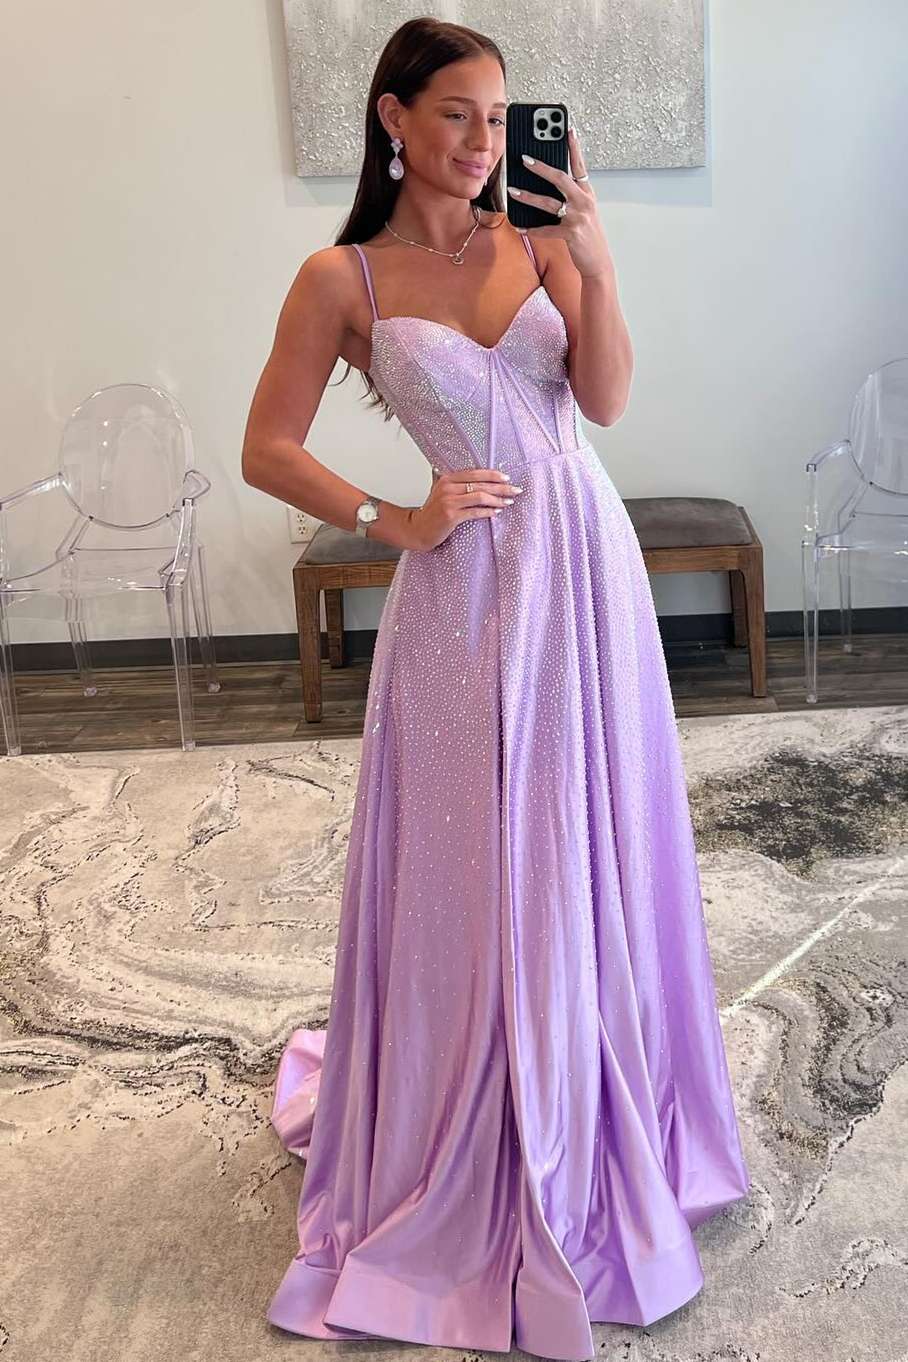 Adrianna | Strapless Lilac Corset A-Line Prom Dress with Rhinestones